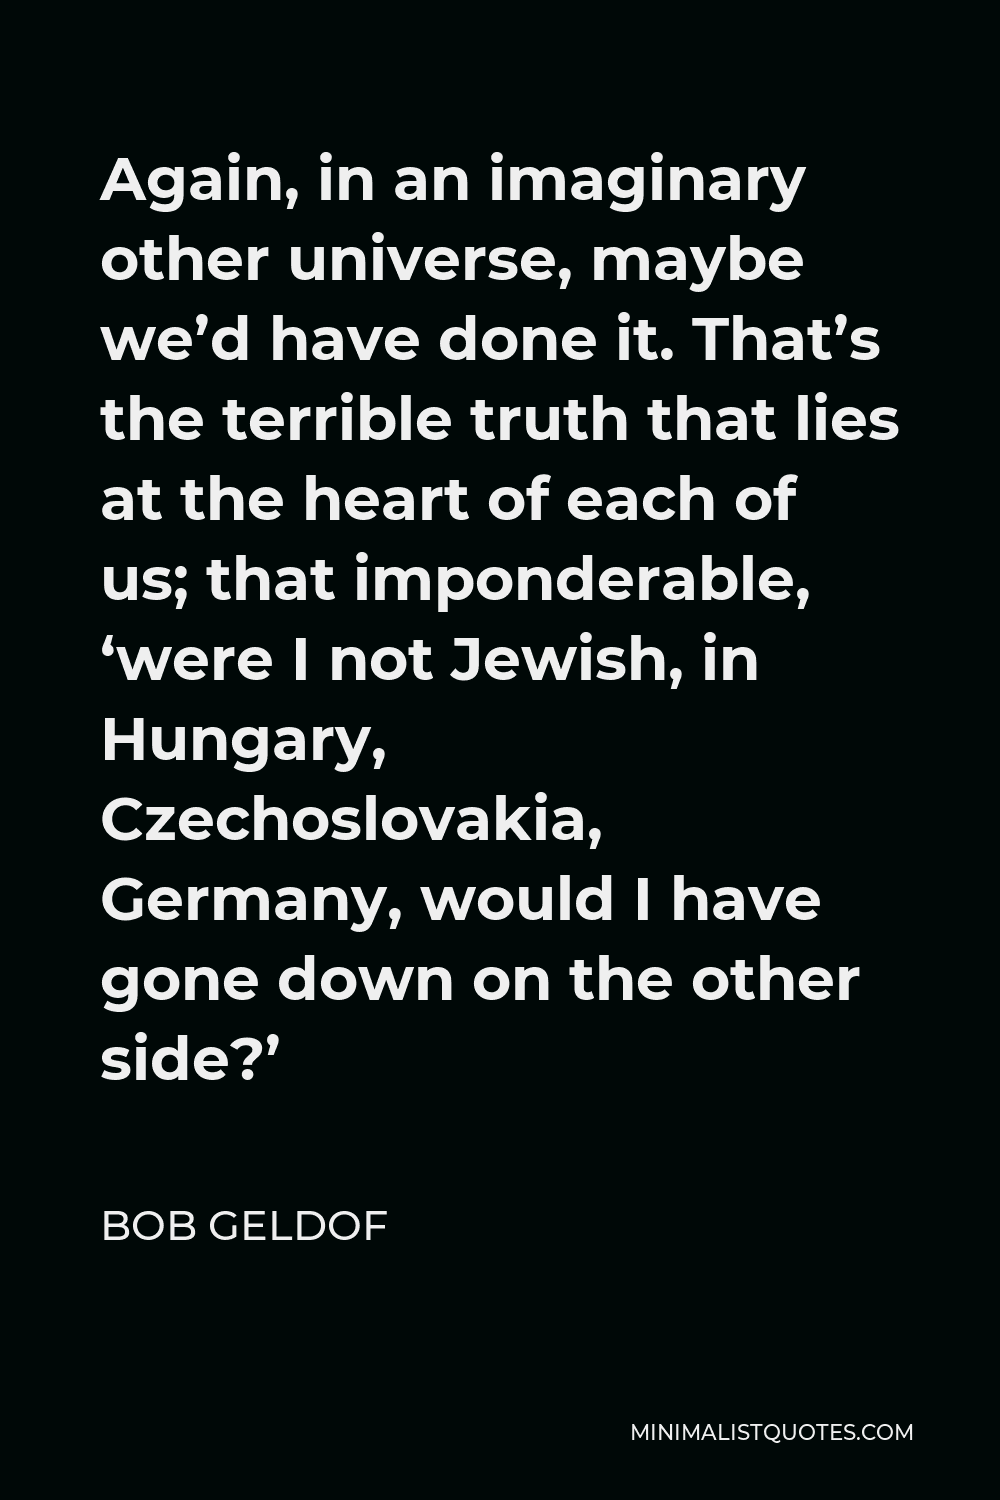 Bob Geldof Quote - Again, in an imaginary other universe, maybe we’d have done it. That’s the terrible truth that lies at the heart of each of us; that imponderable, ‘were I not Jewish, in Hungary, Czechoslovakia, Germany, would I have gone down on the other side?’